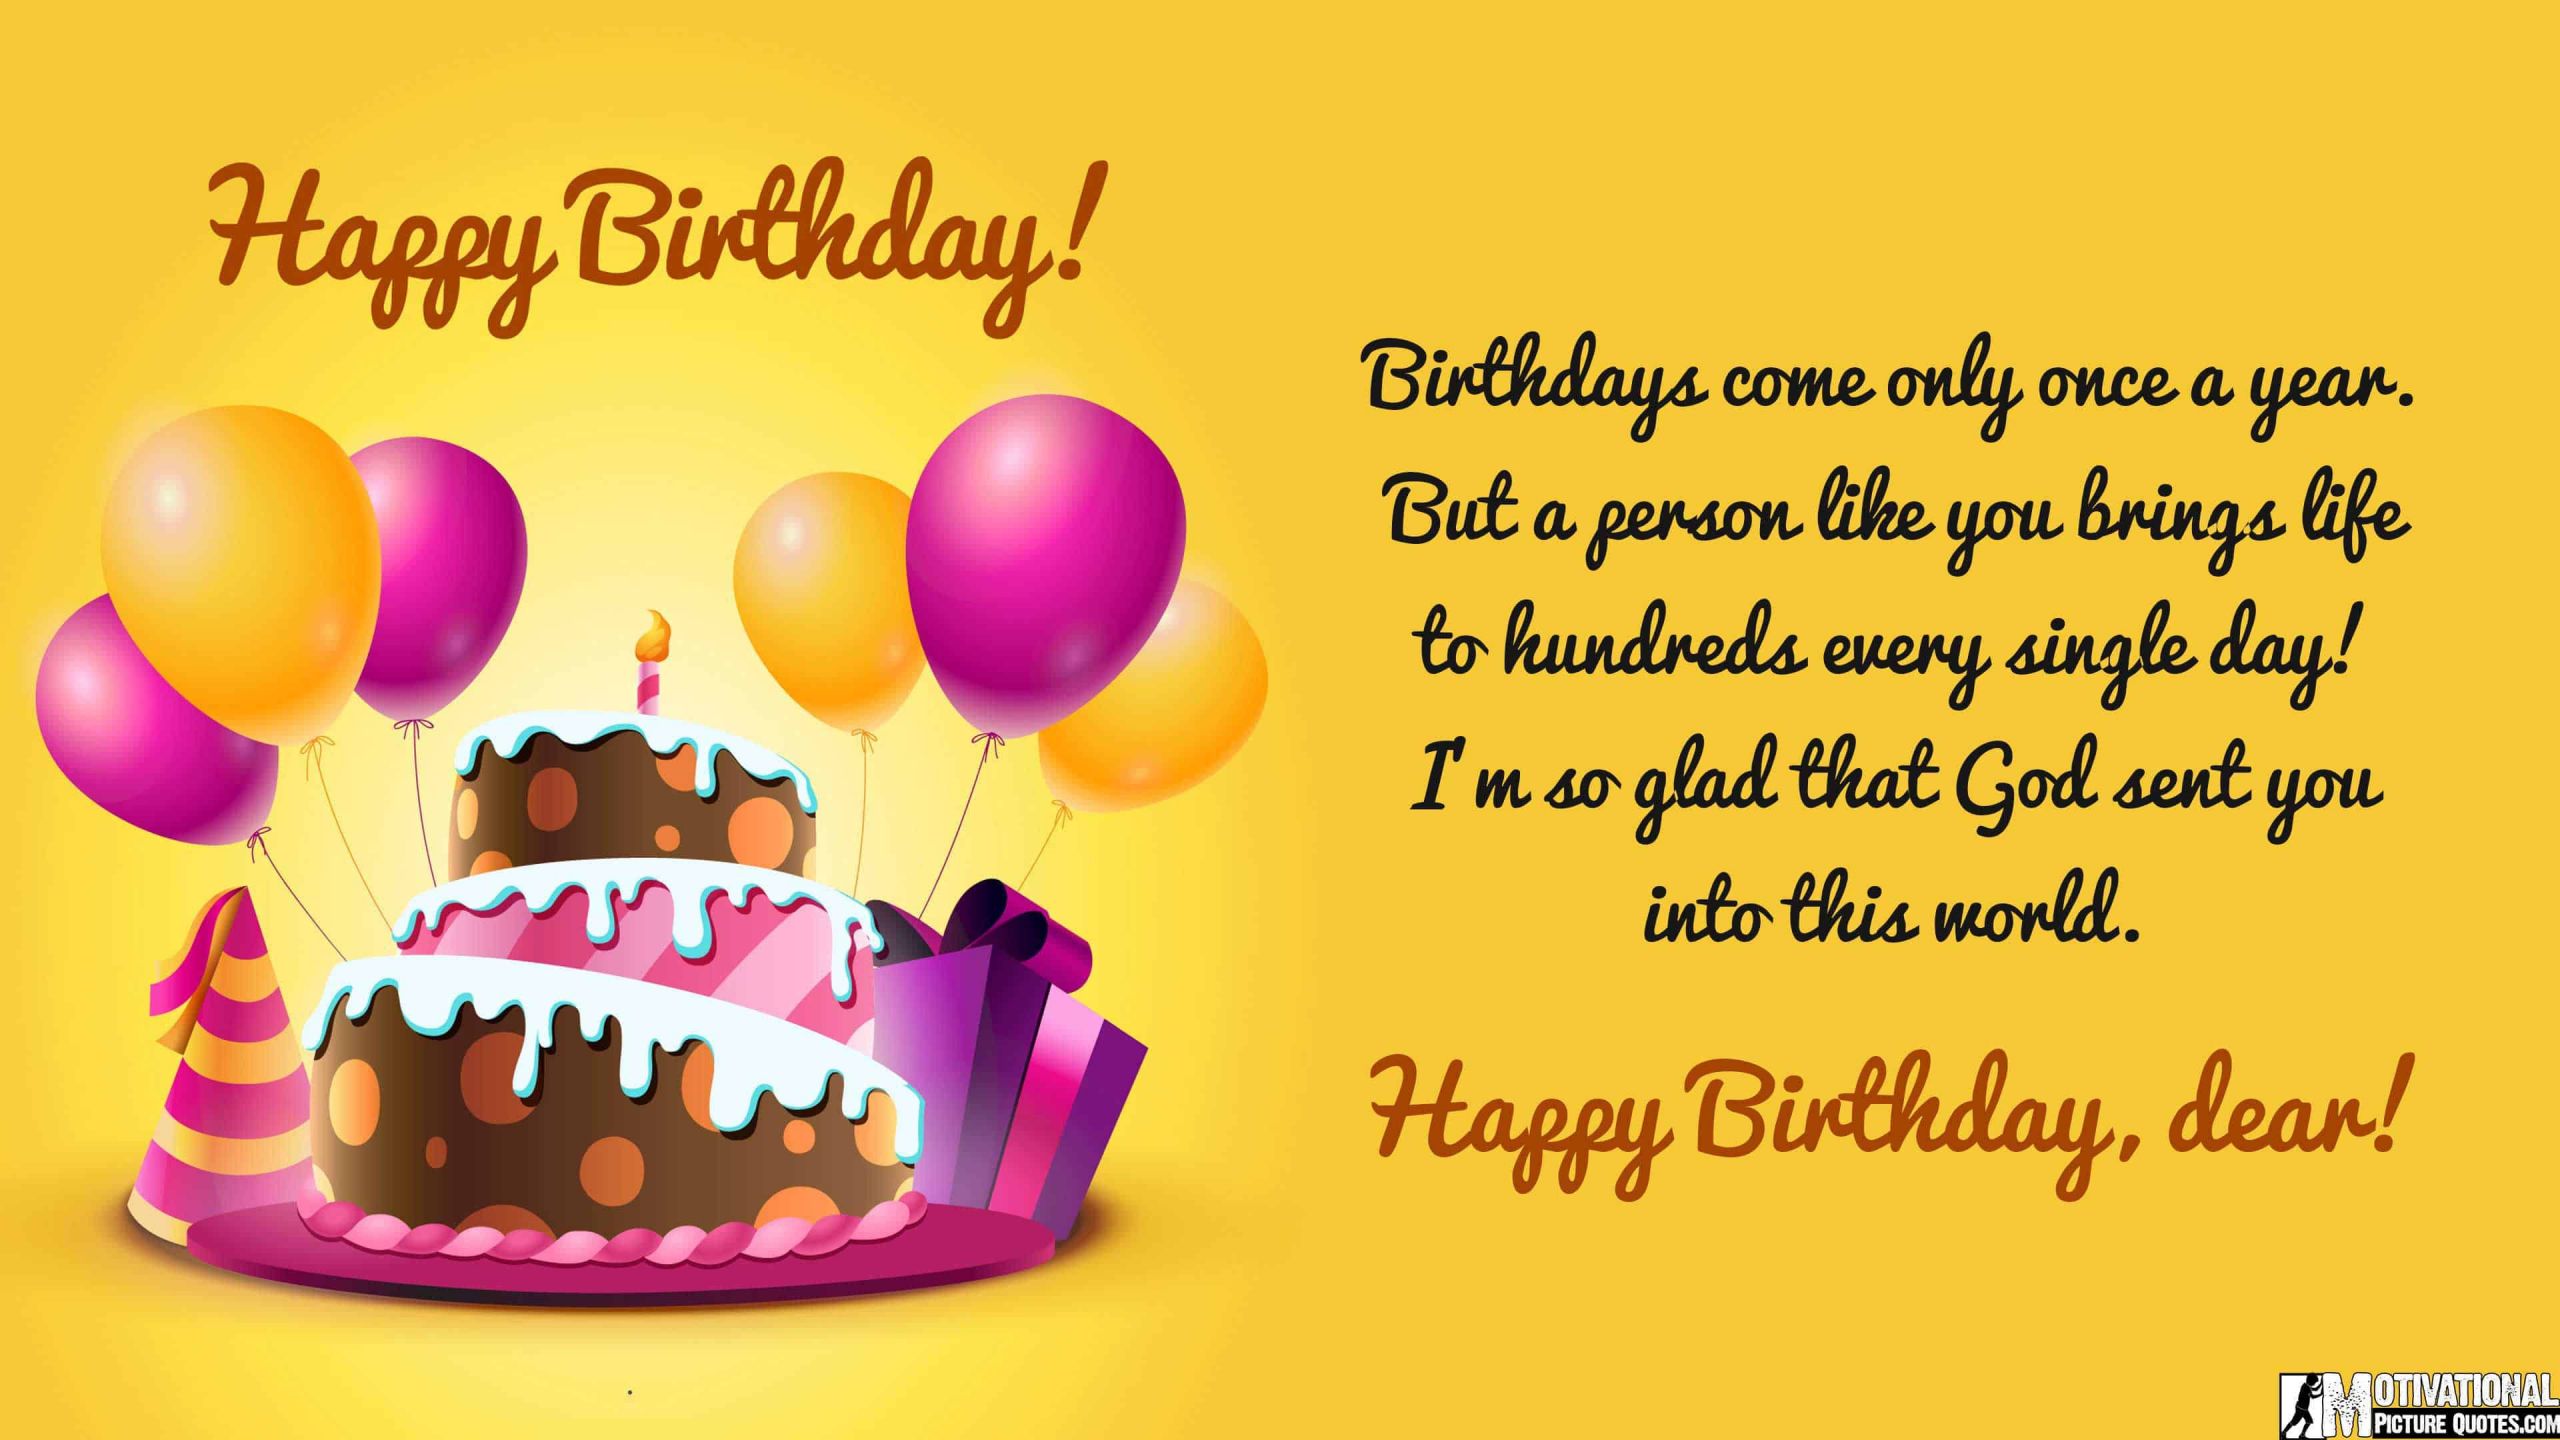 Happy Birthday Friend Images With Quotes
 50 Happy Birthday For Him With Quotes iLove Messages